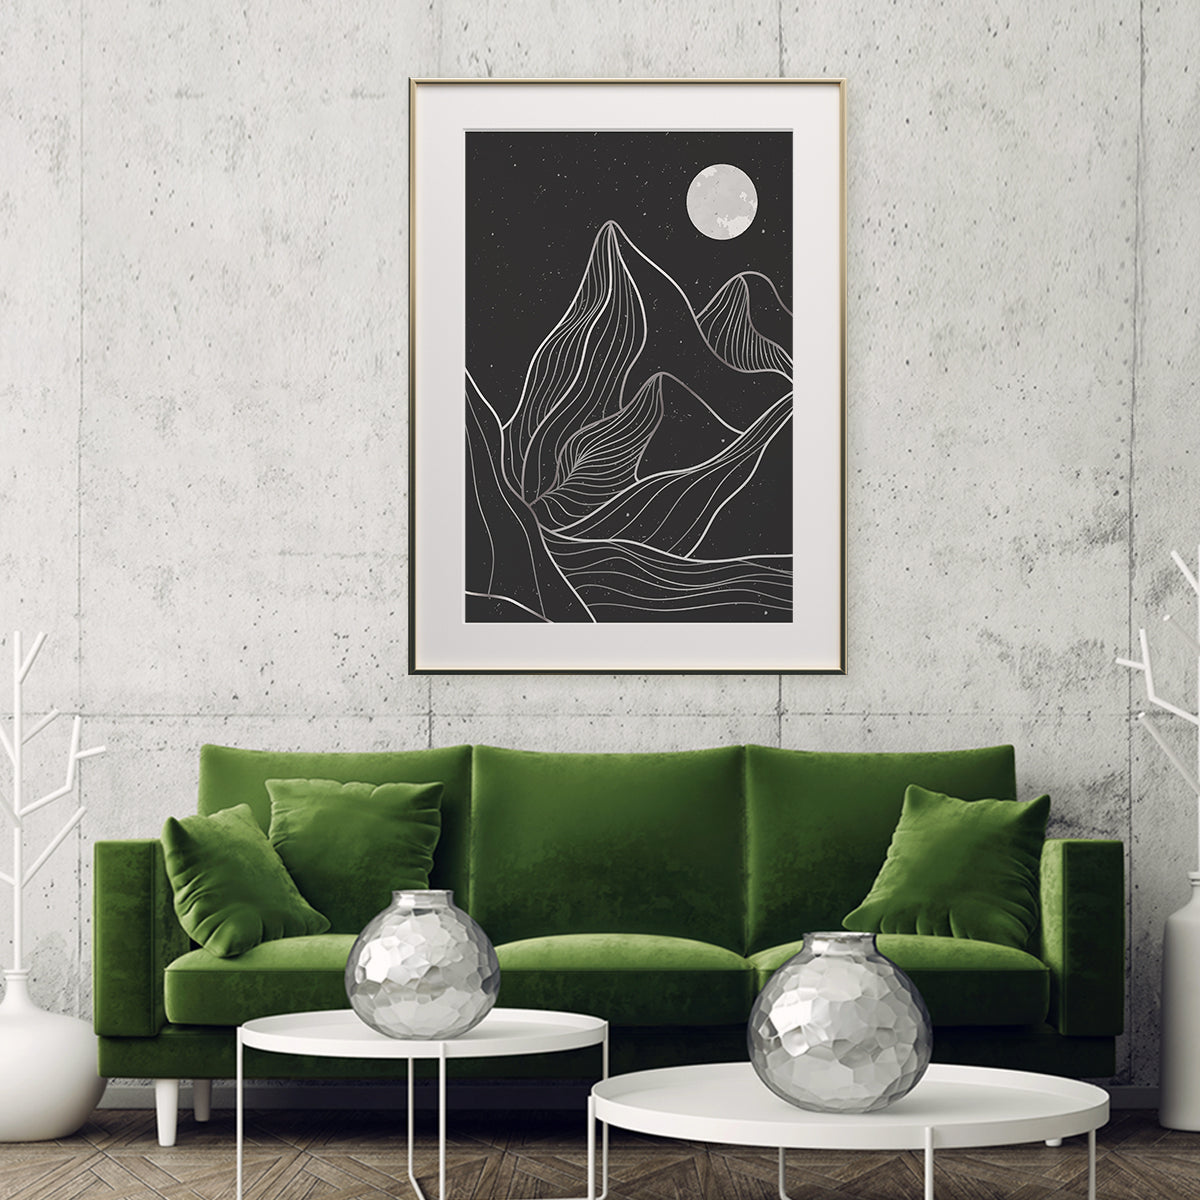 Black Mountain Line Art Posters And Wall Art Prints-Vertical Posters NOT FRAMED-CetArt-8″x10″ inches-CetArt